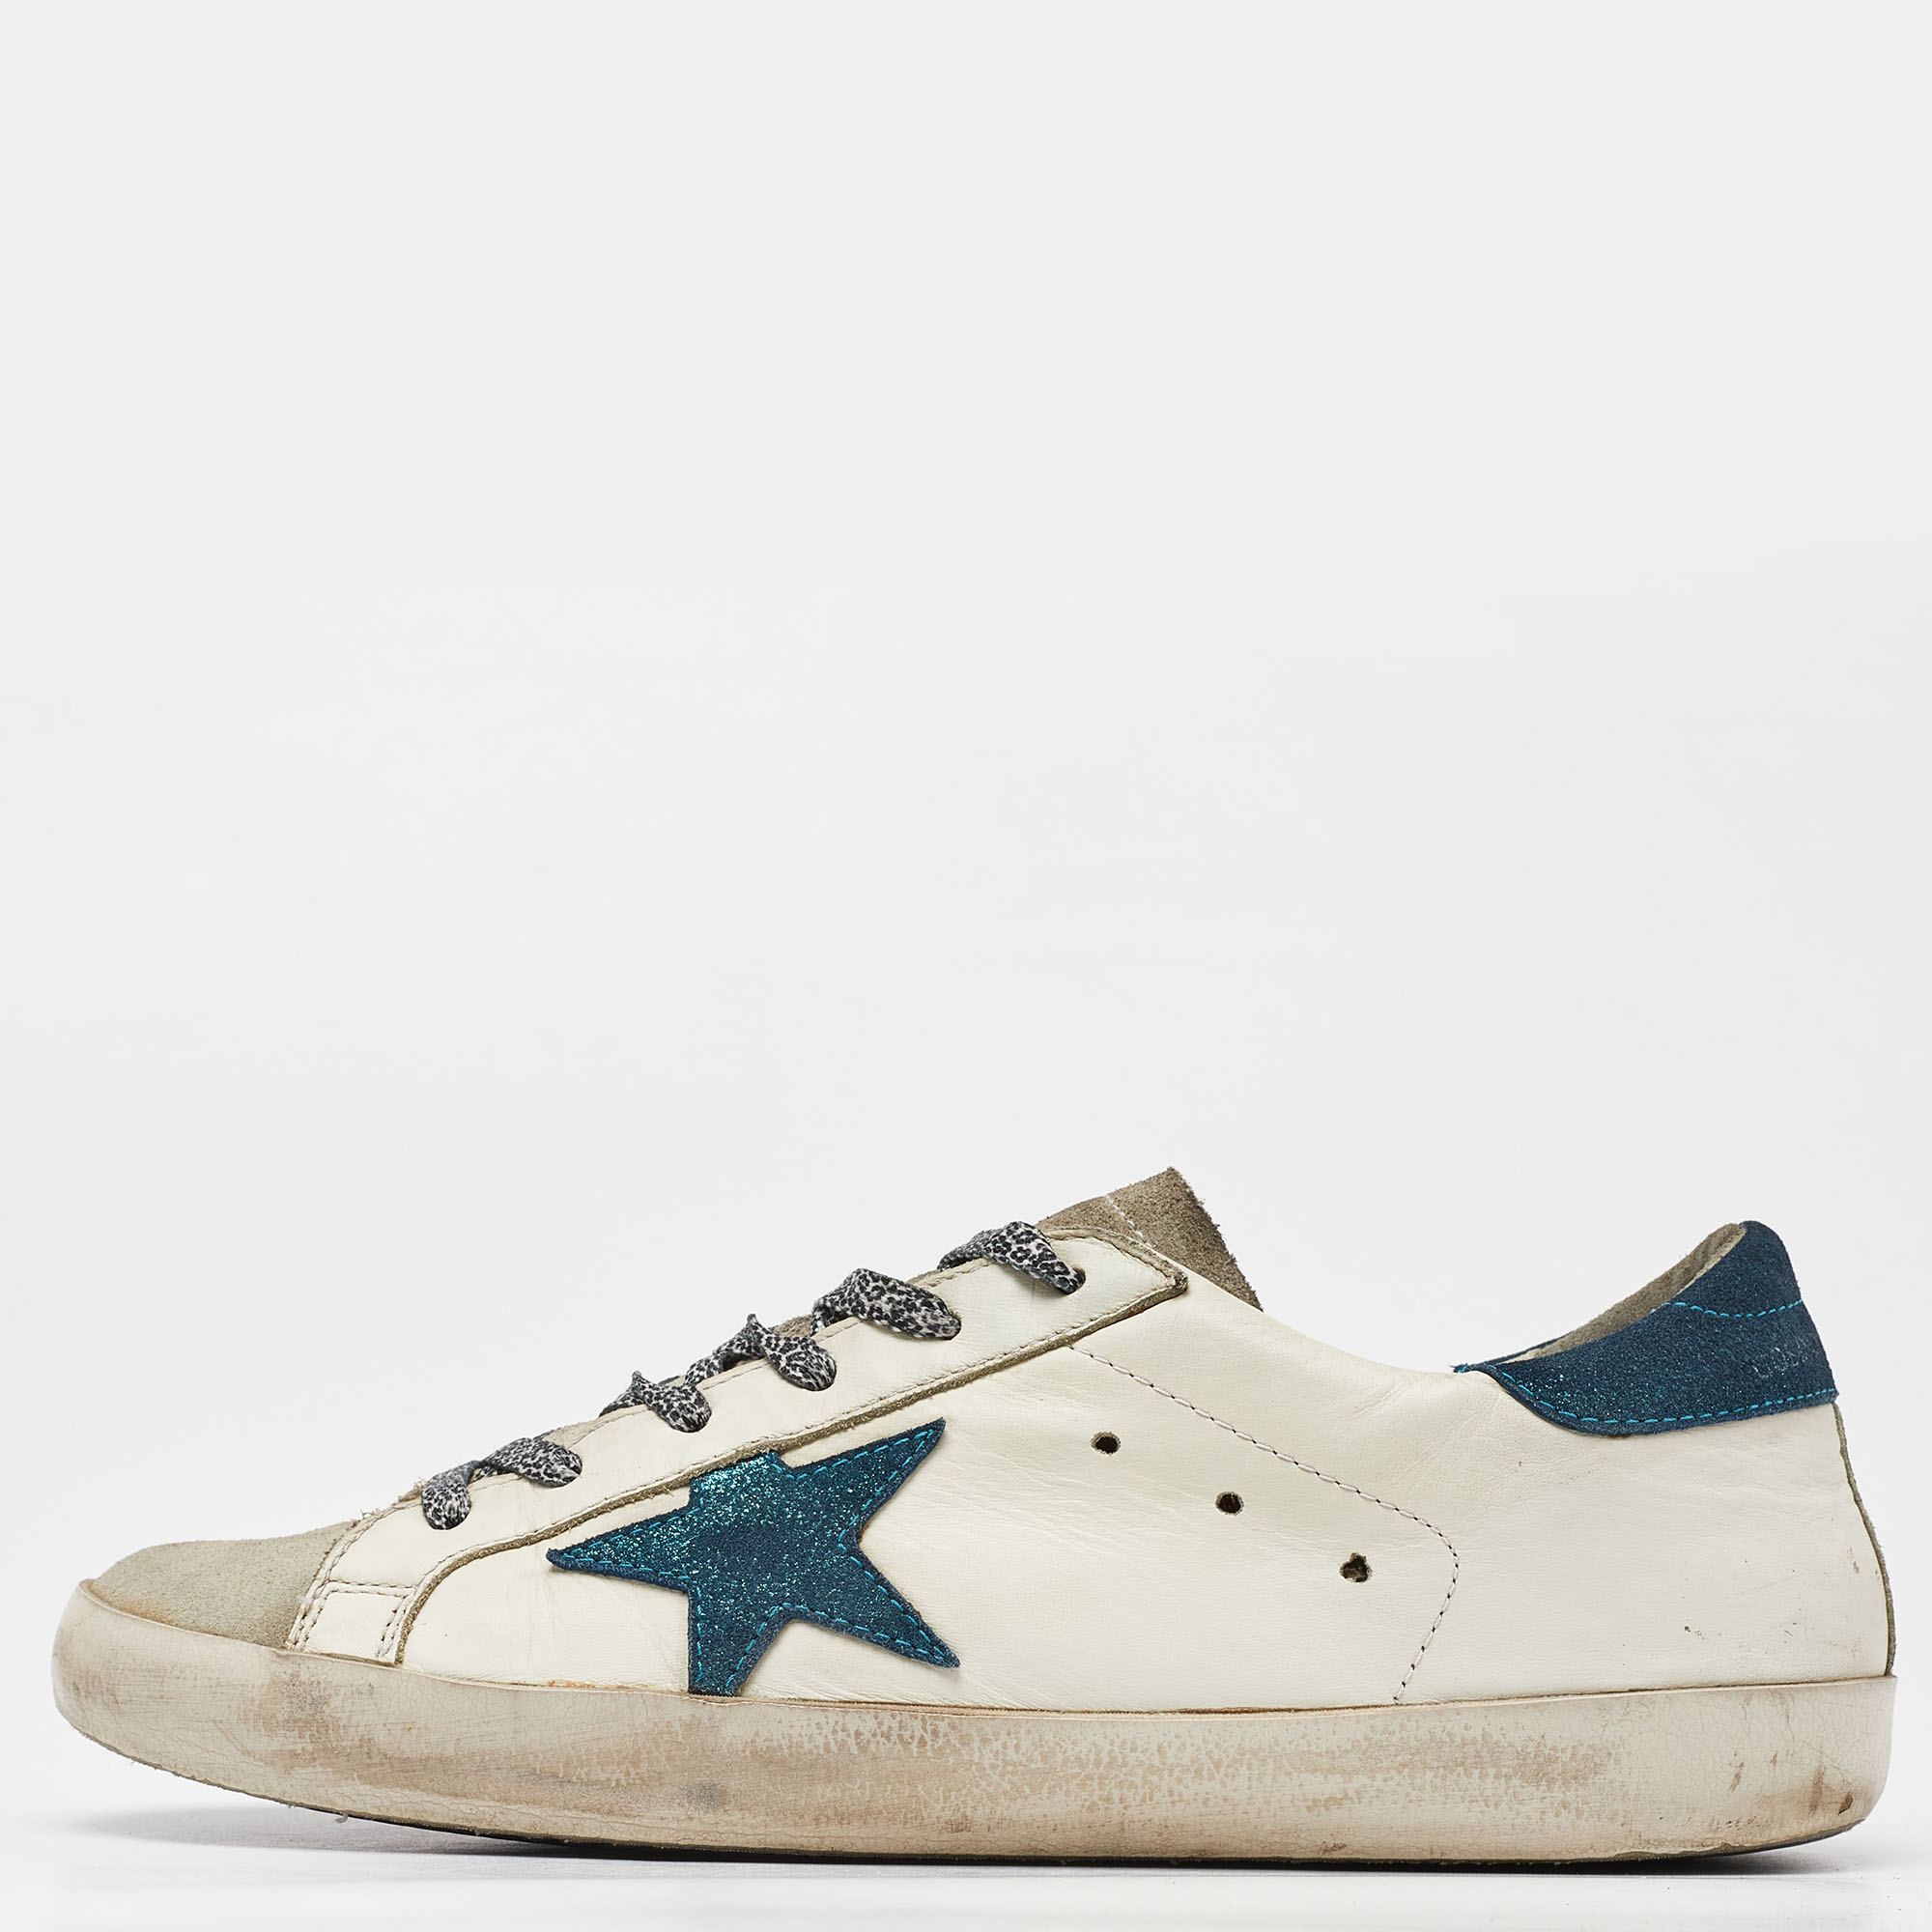 Golden goose white/grey suede and leather superstar low top sneakers size 41